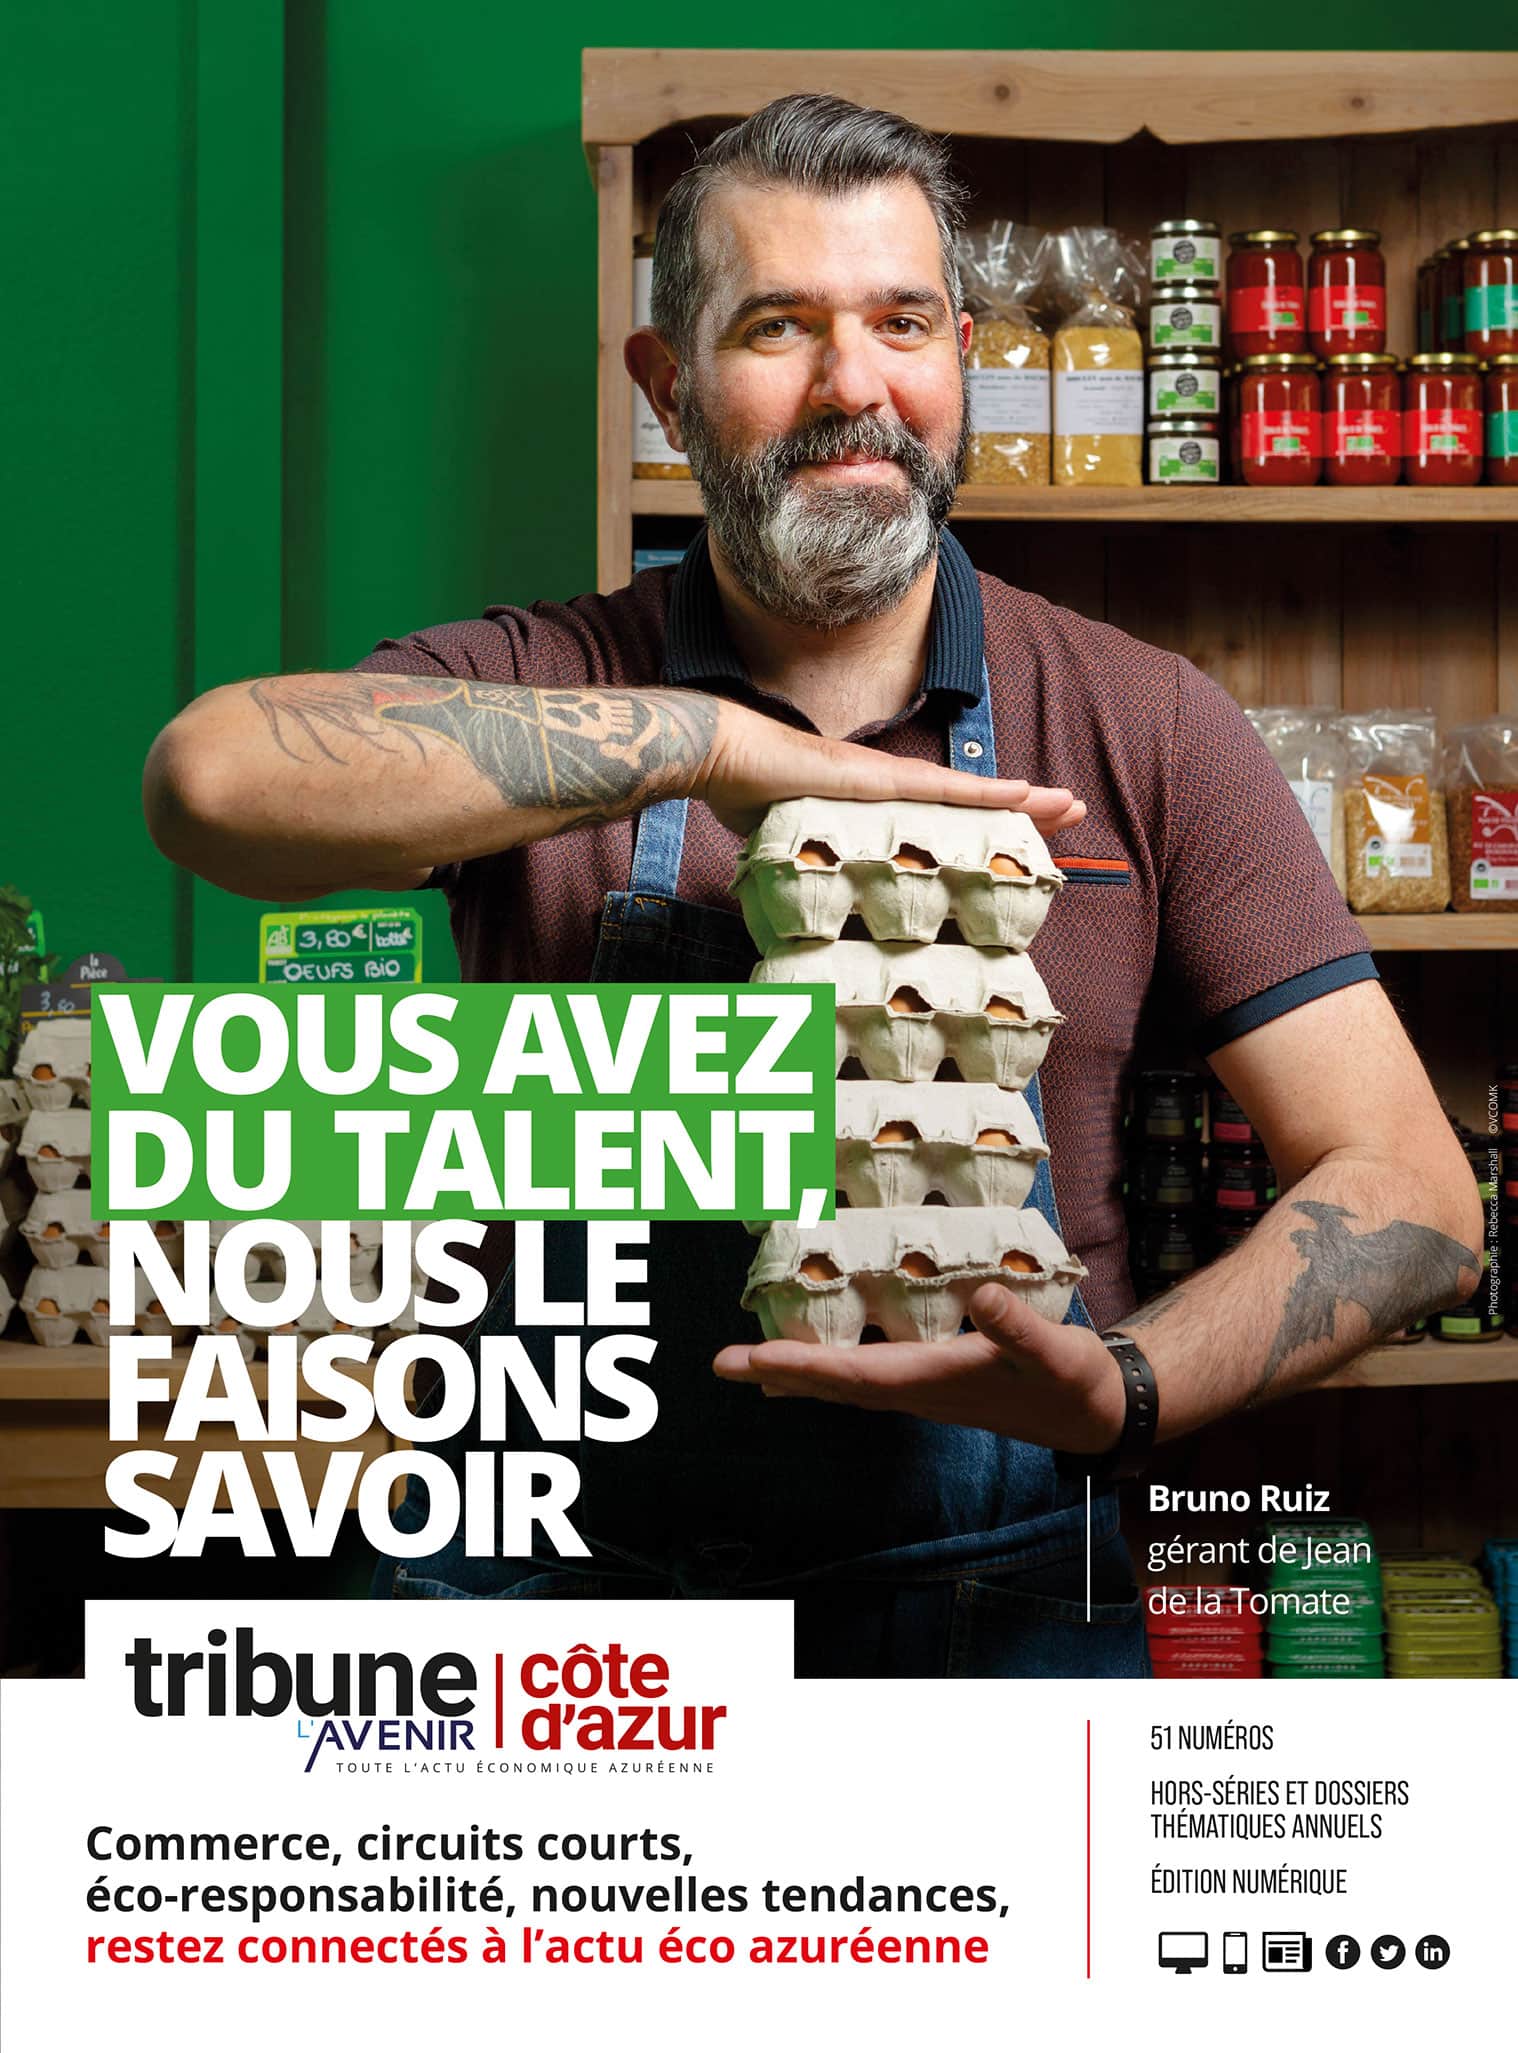 Advertising poster showing a portrait of a man holding a stack of eggboxes overlain with text (French)